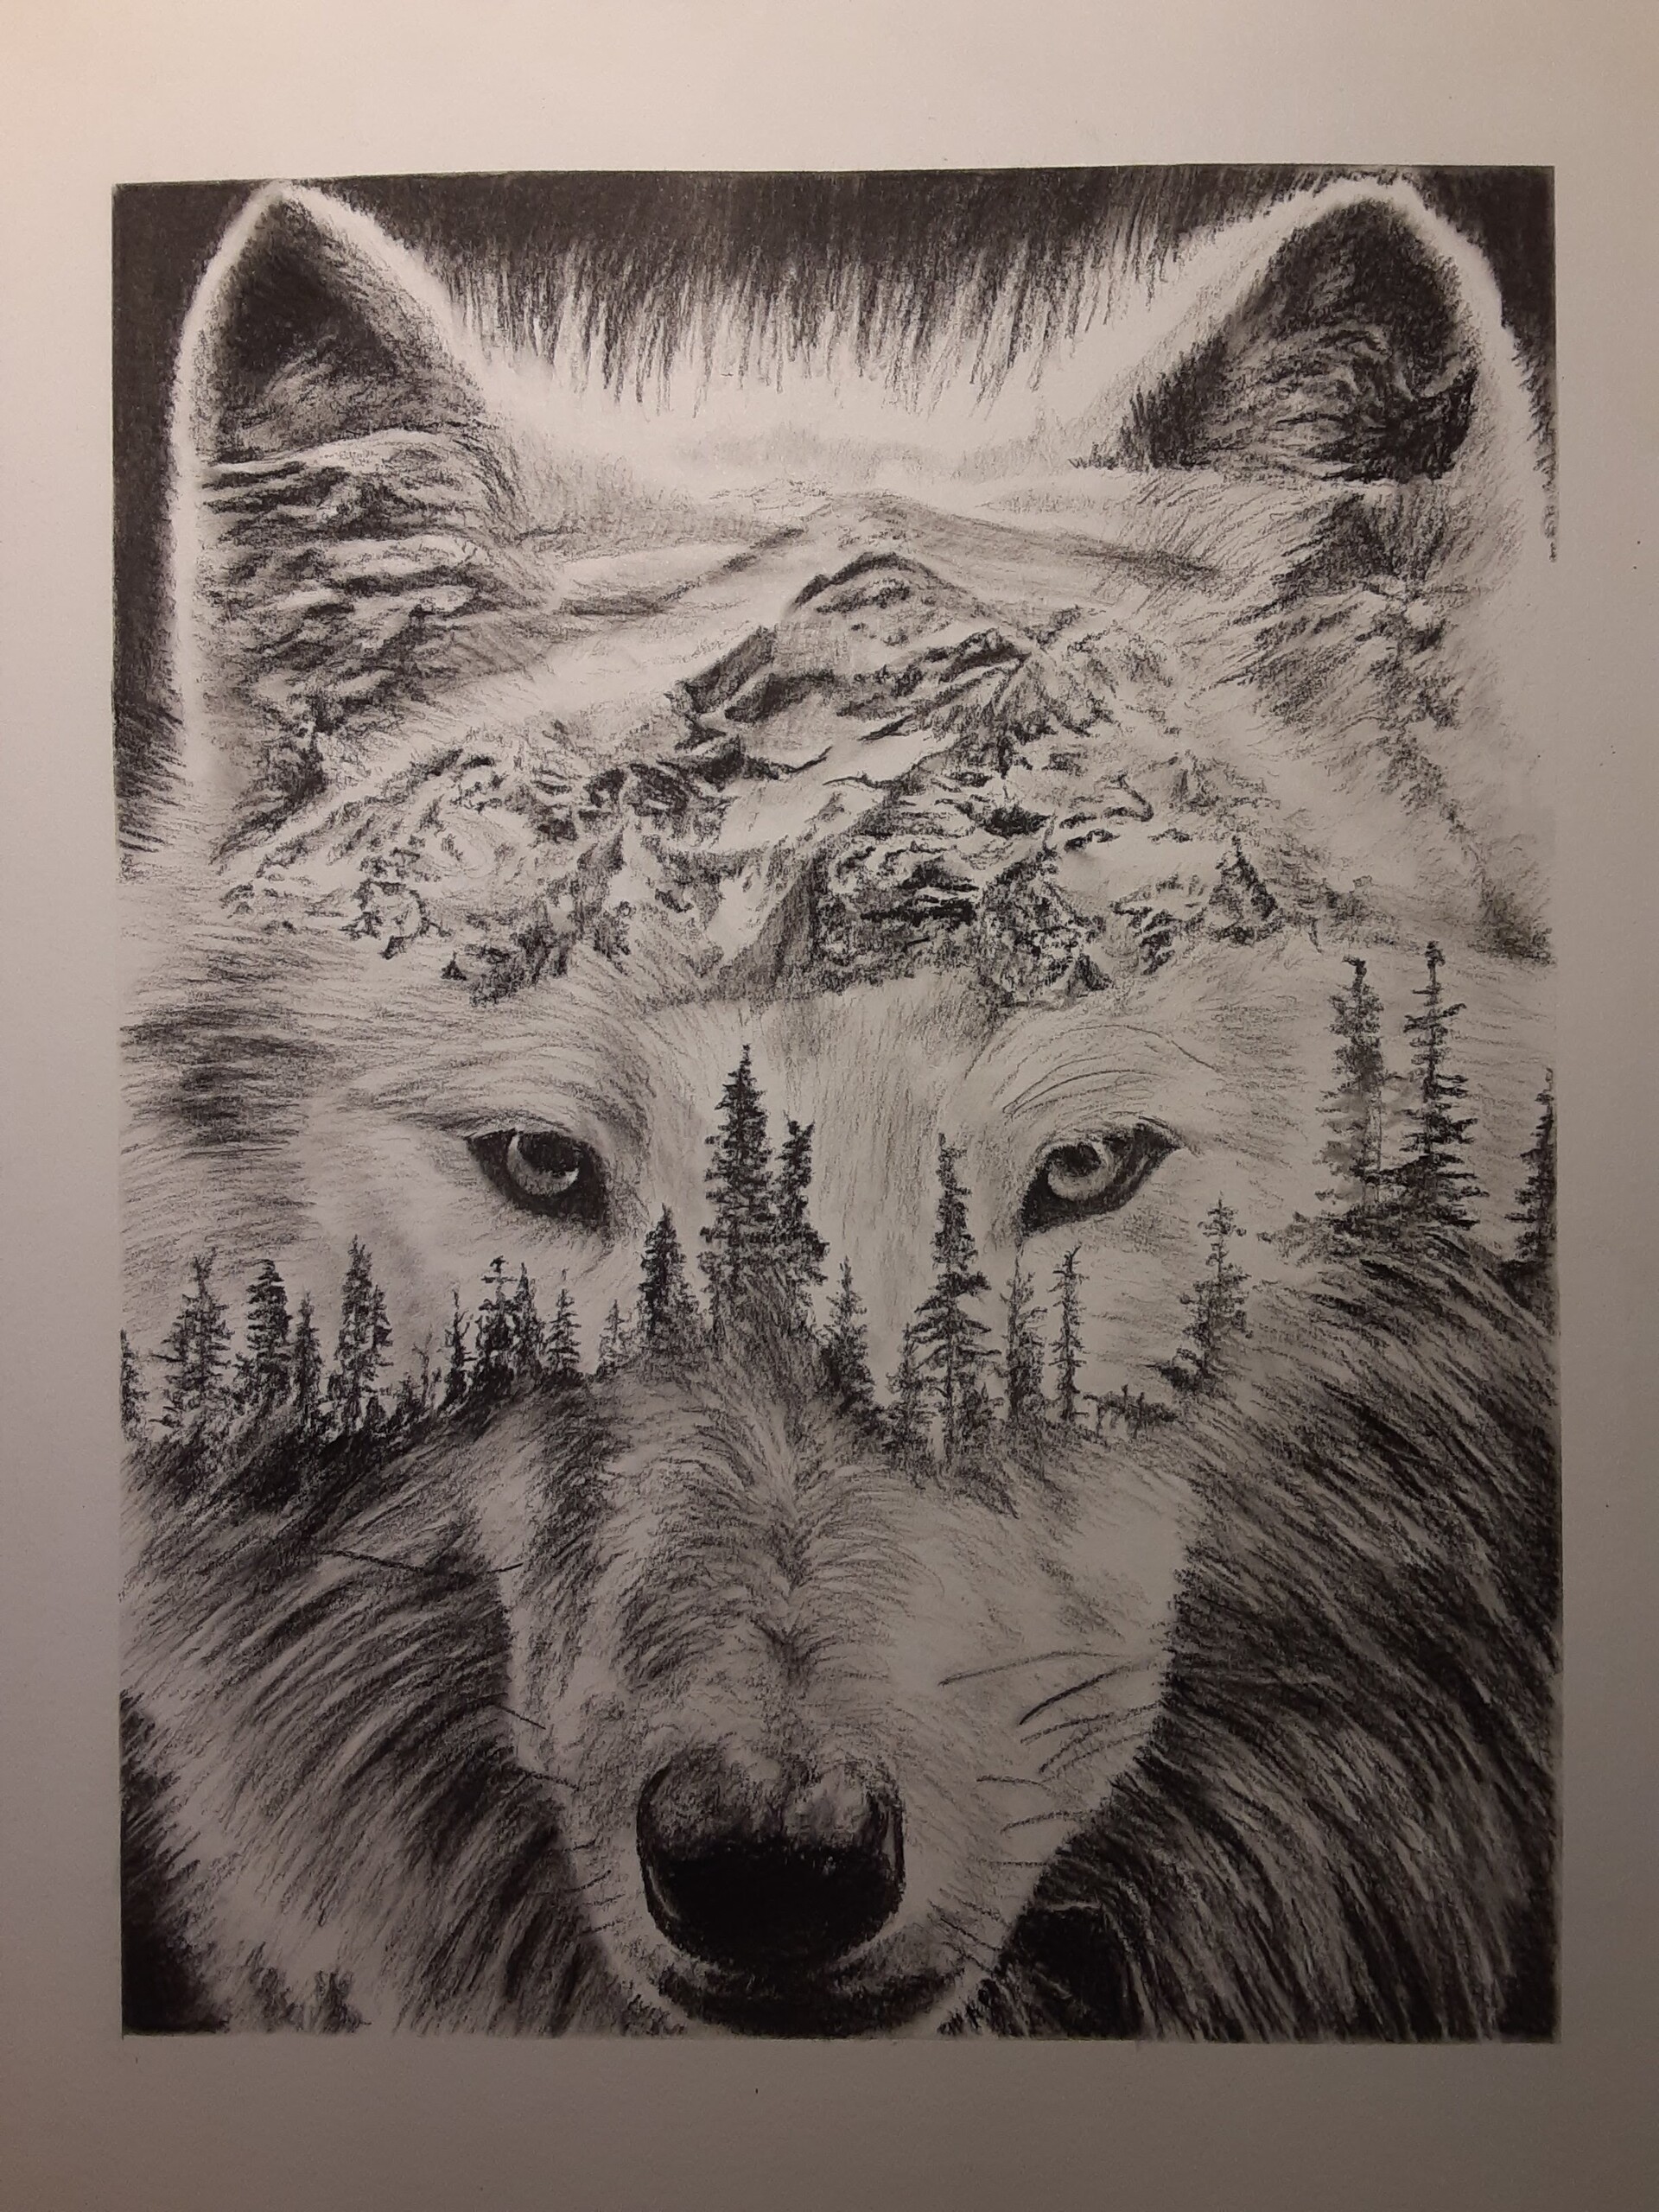 ArtStation - Charcoal drawing of The Wolf